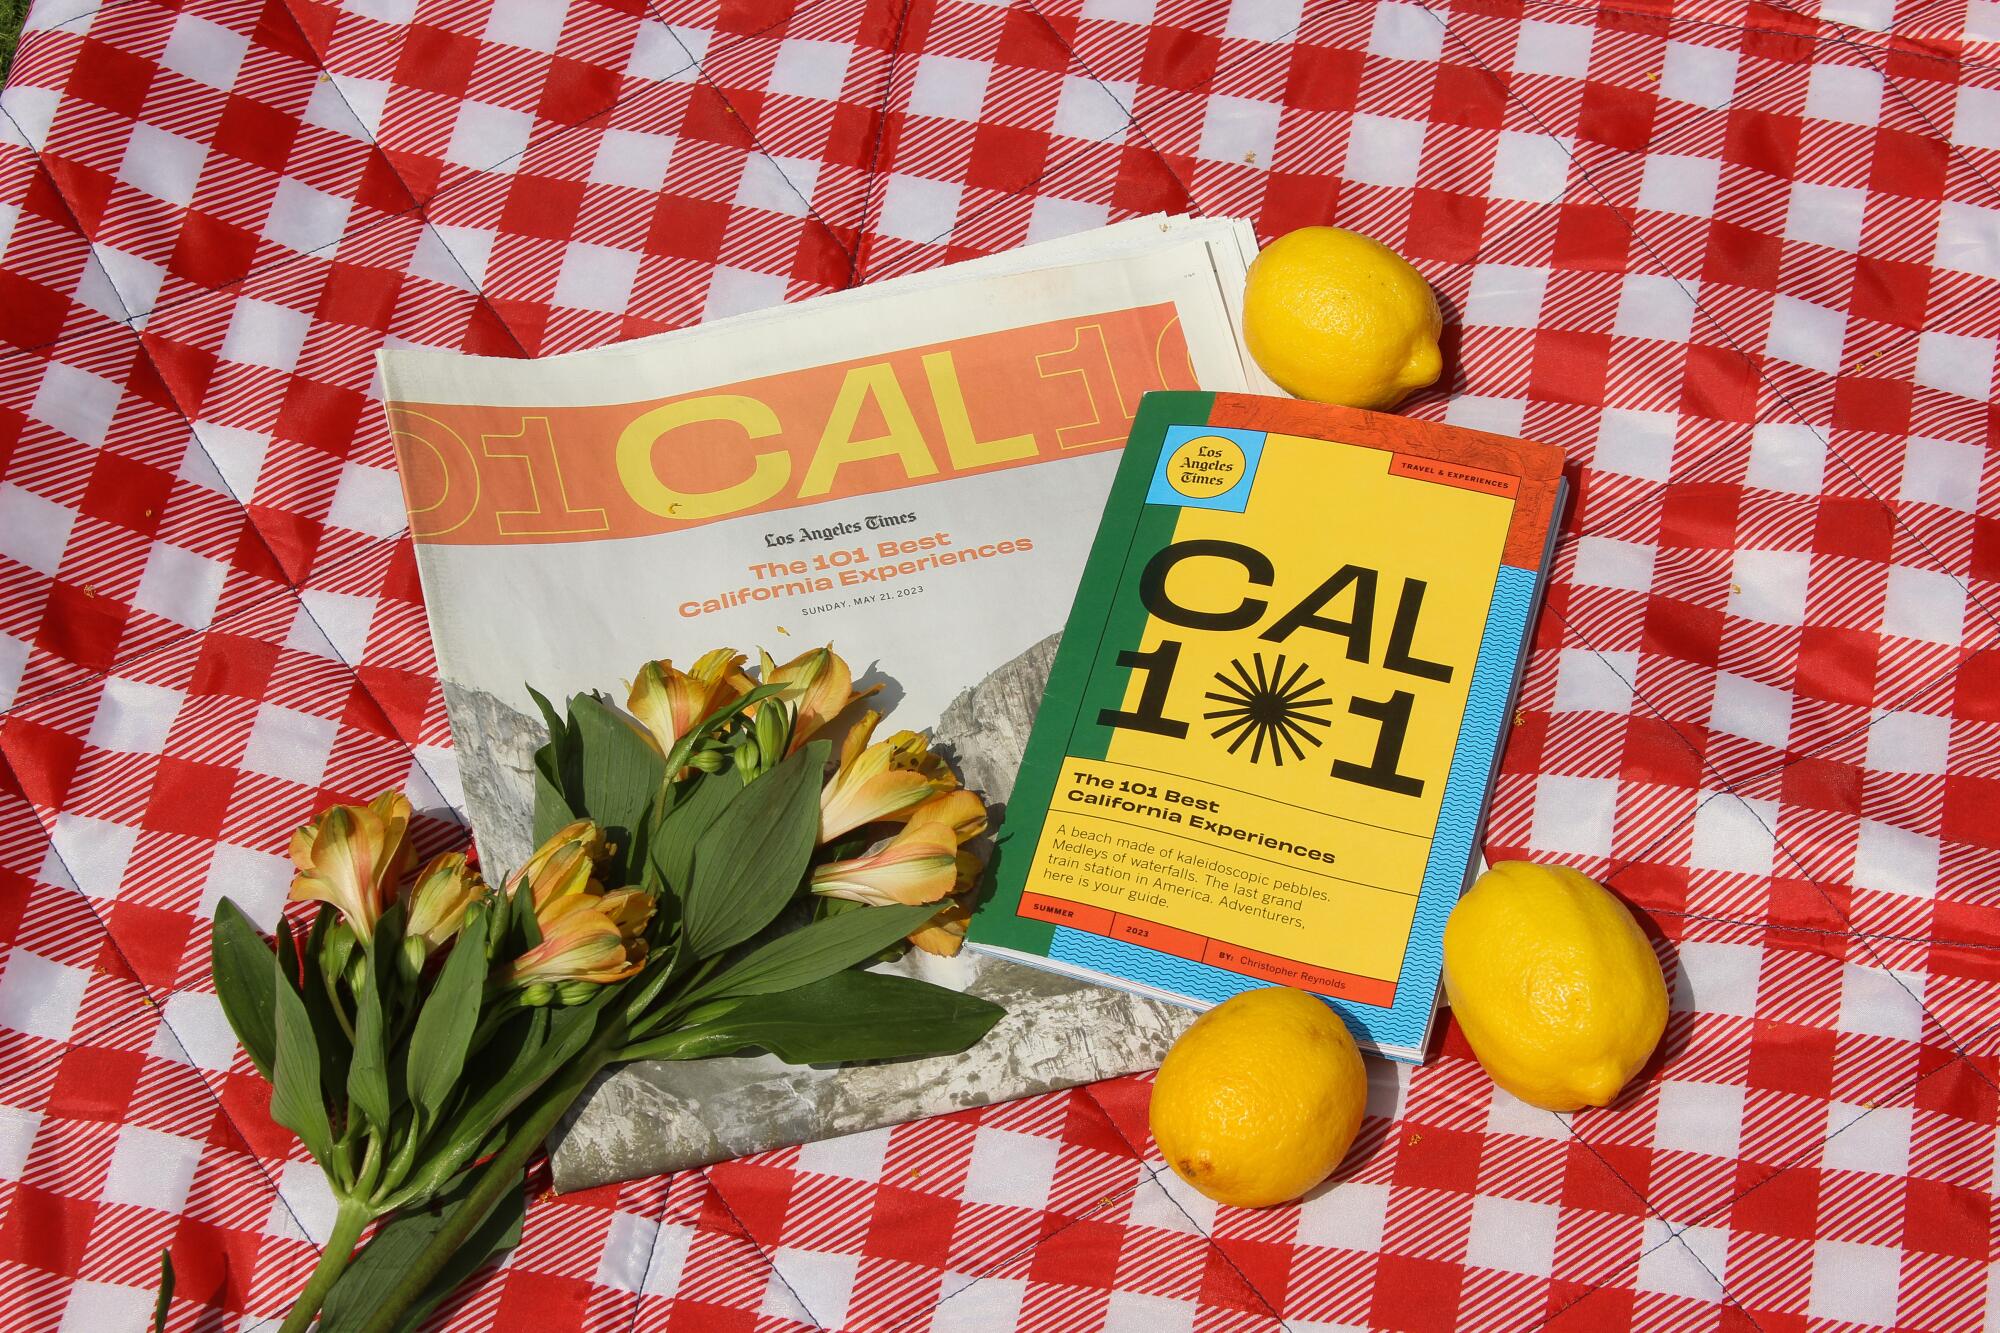 A display of the CAL101 news print section and zine with flowers and lemons.